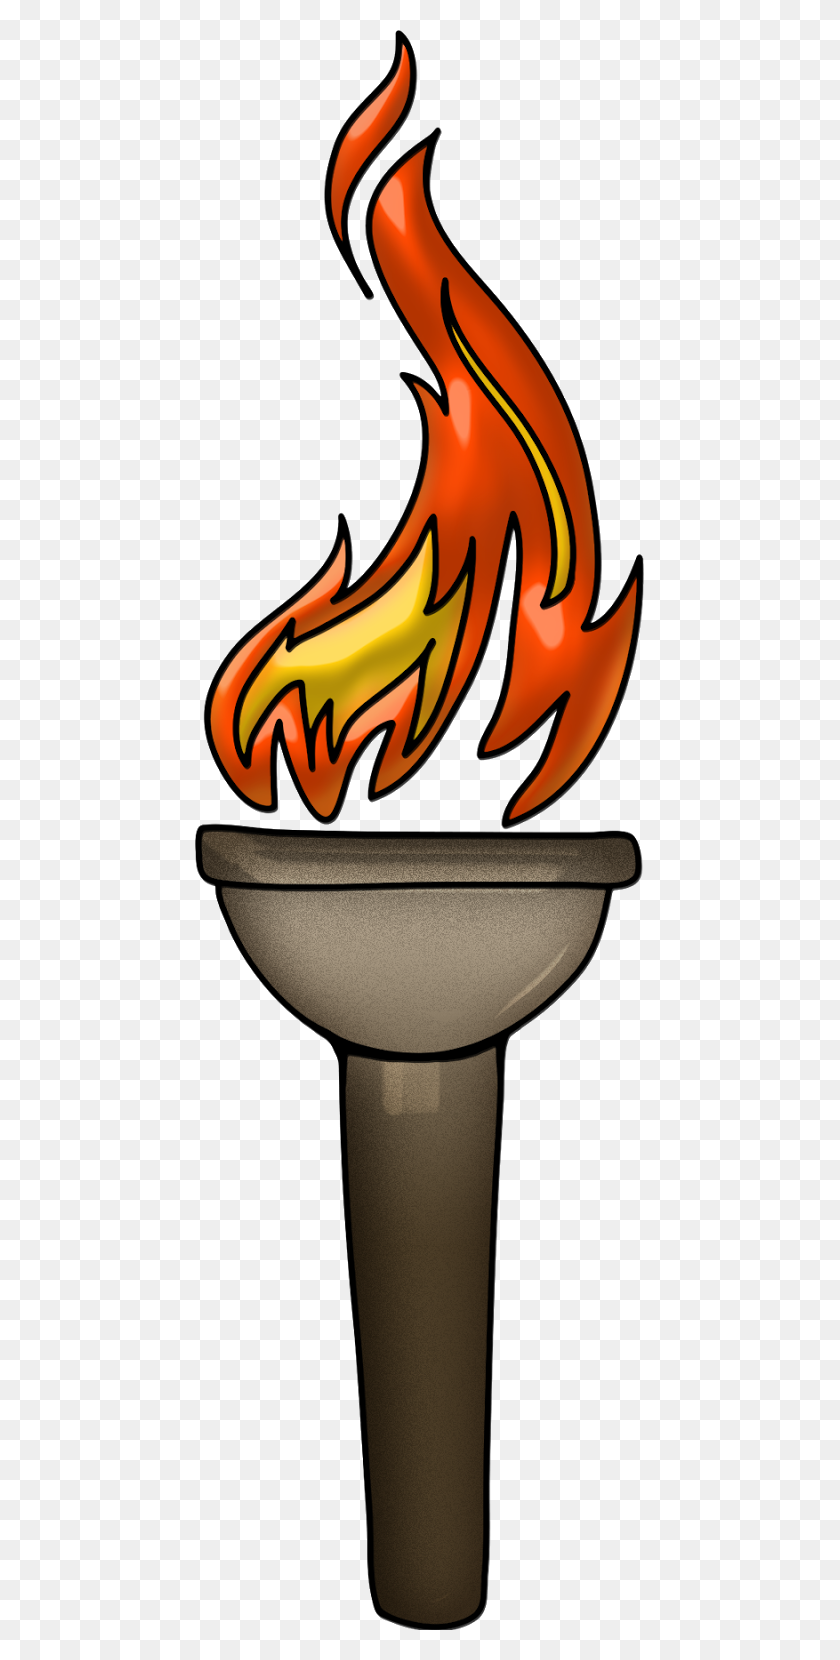 449x1600 Torch Hd Png Transparent Torch Hd Images - Torch PNG